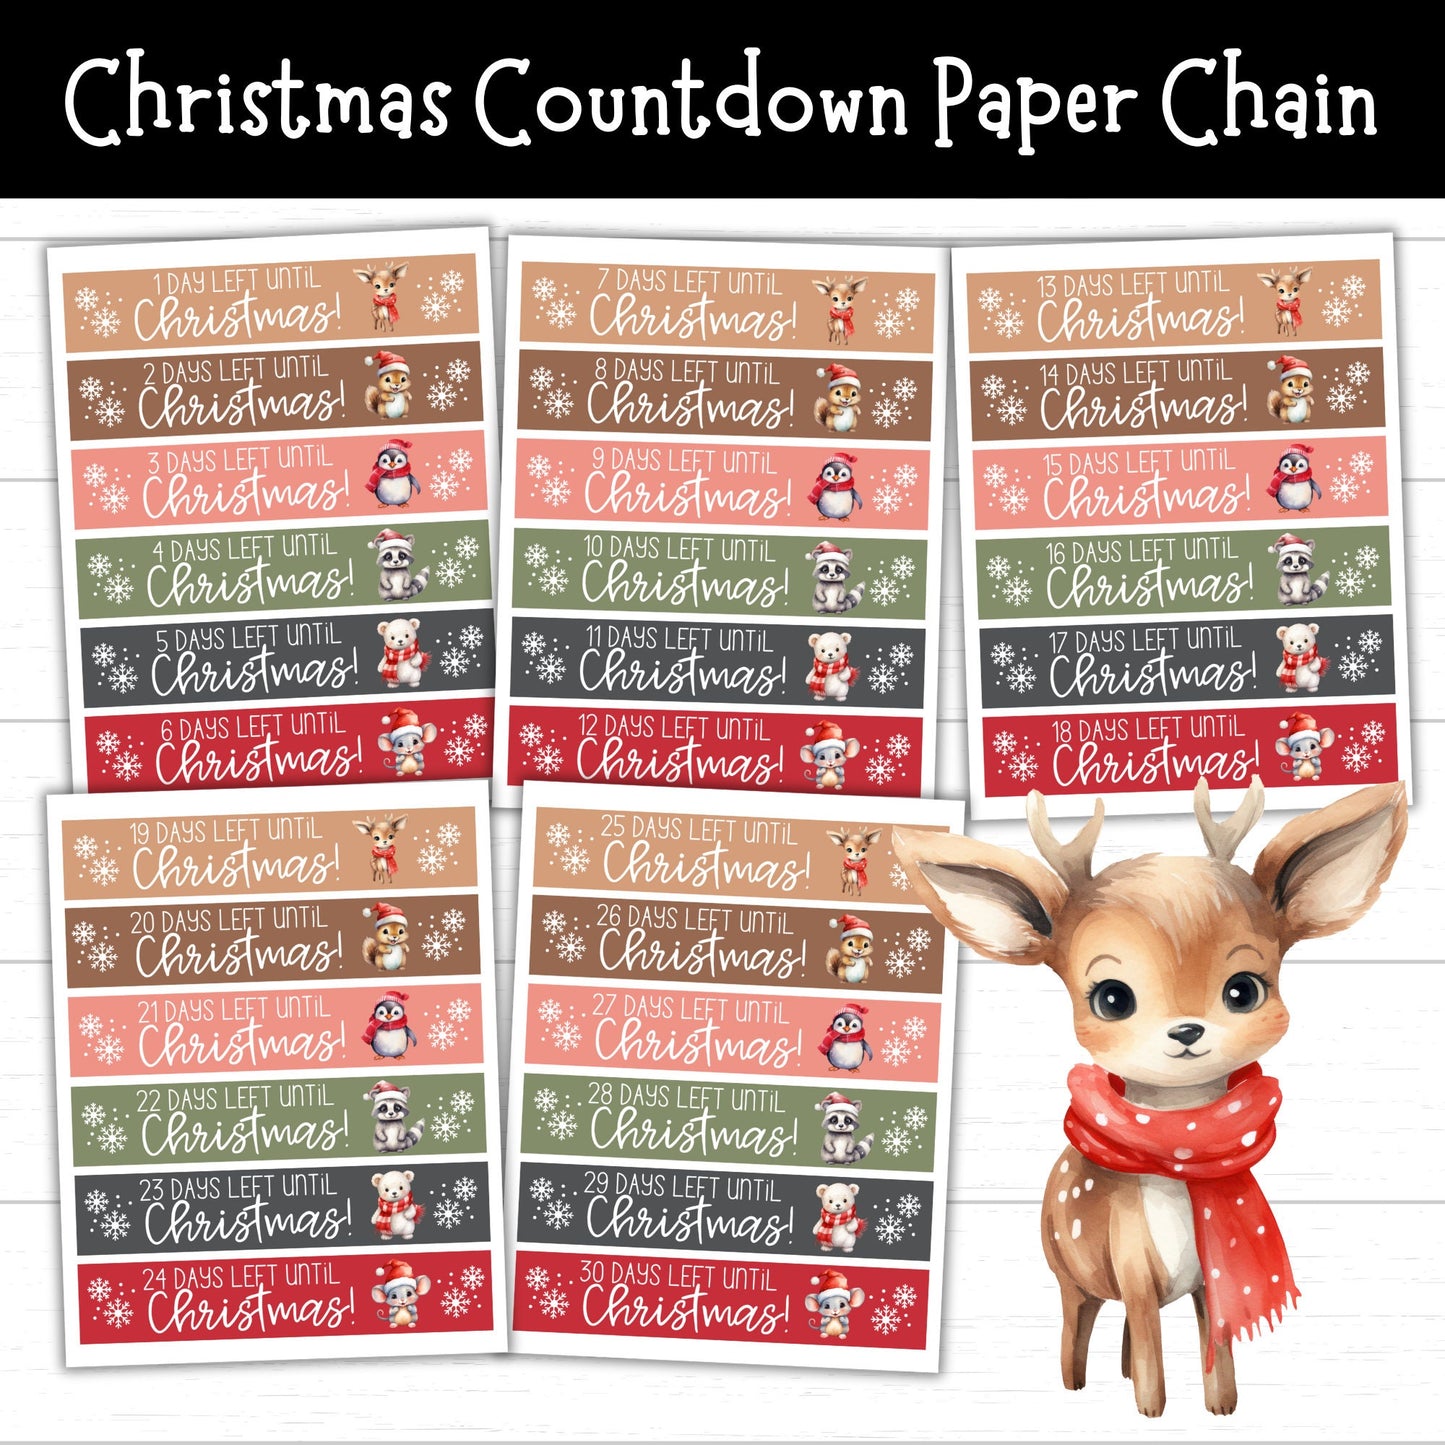 Christmas Countdown Paper Chain, 30 Day Christmas Countdown, Christmas Countdown Printables, Printable Paper Chains, Cute Animal Paper Chain